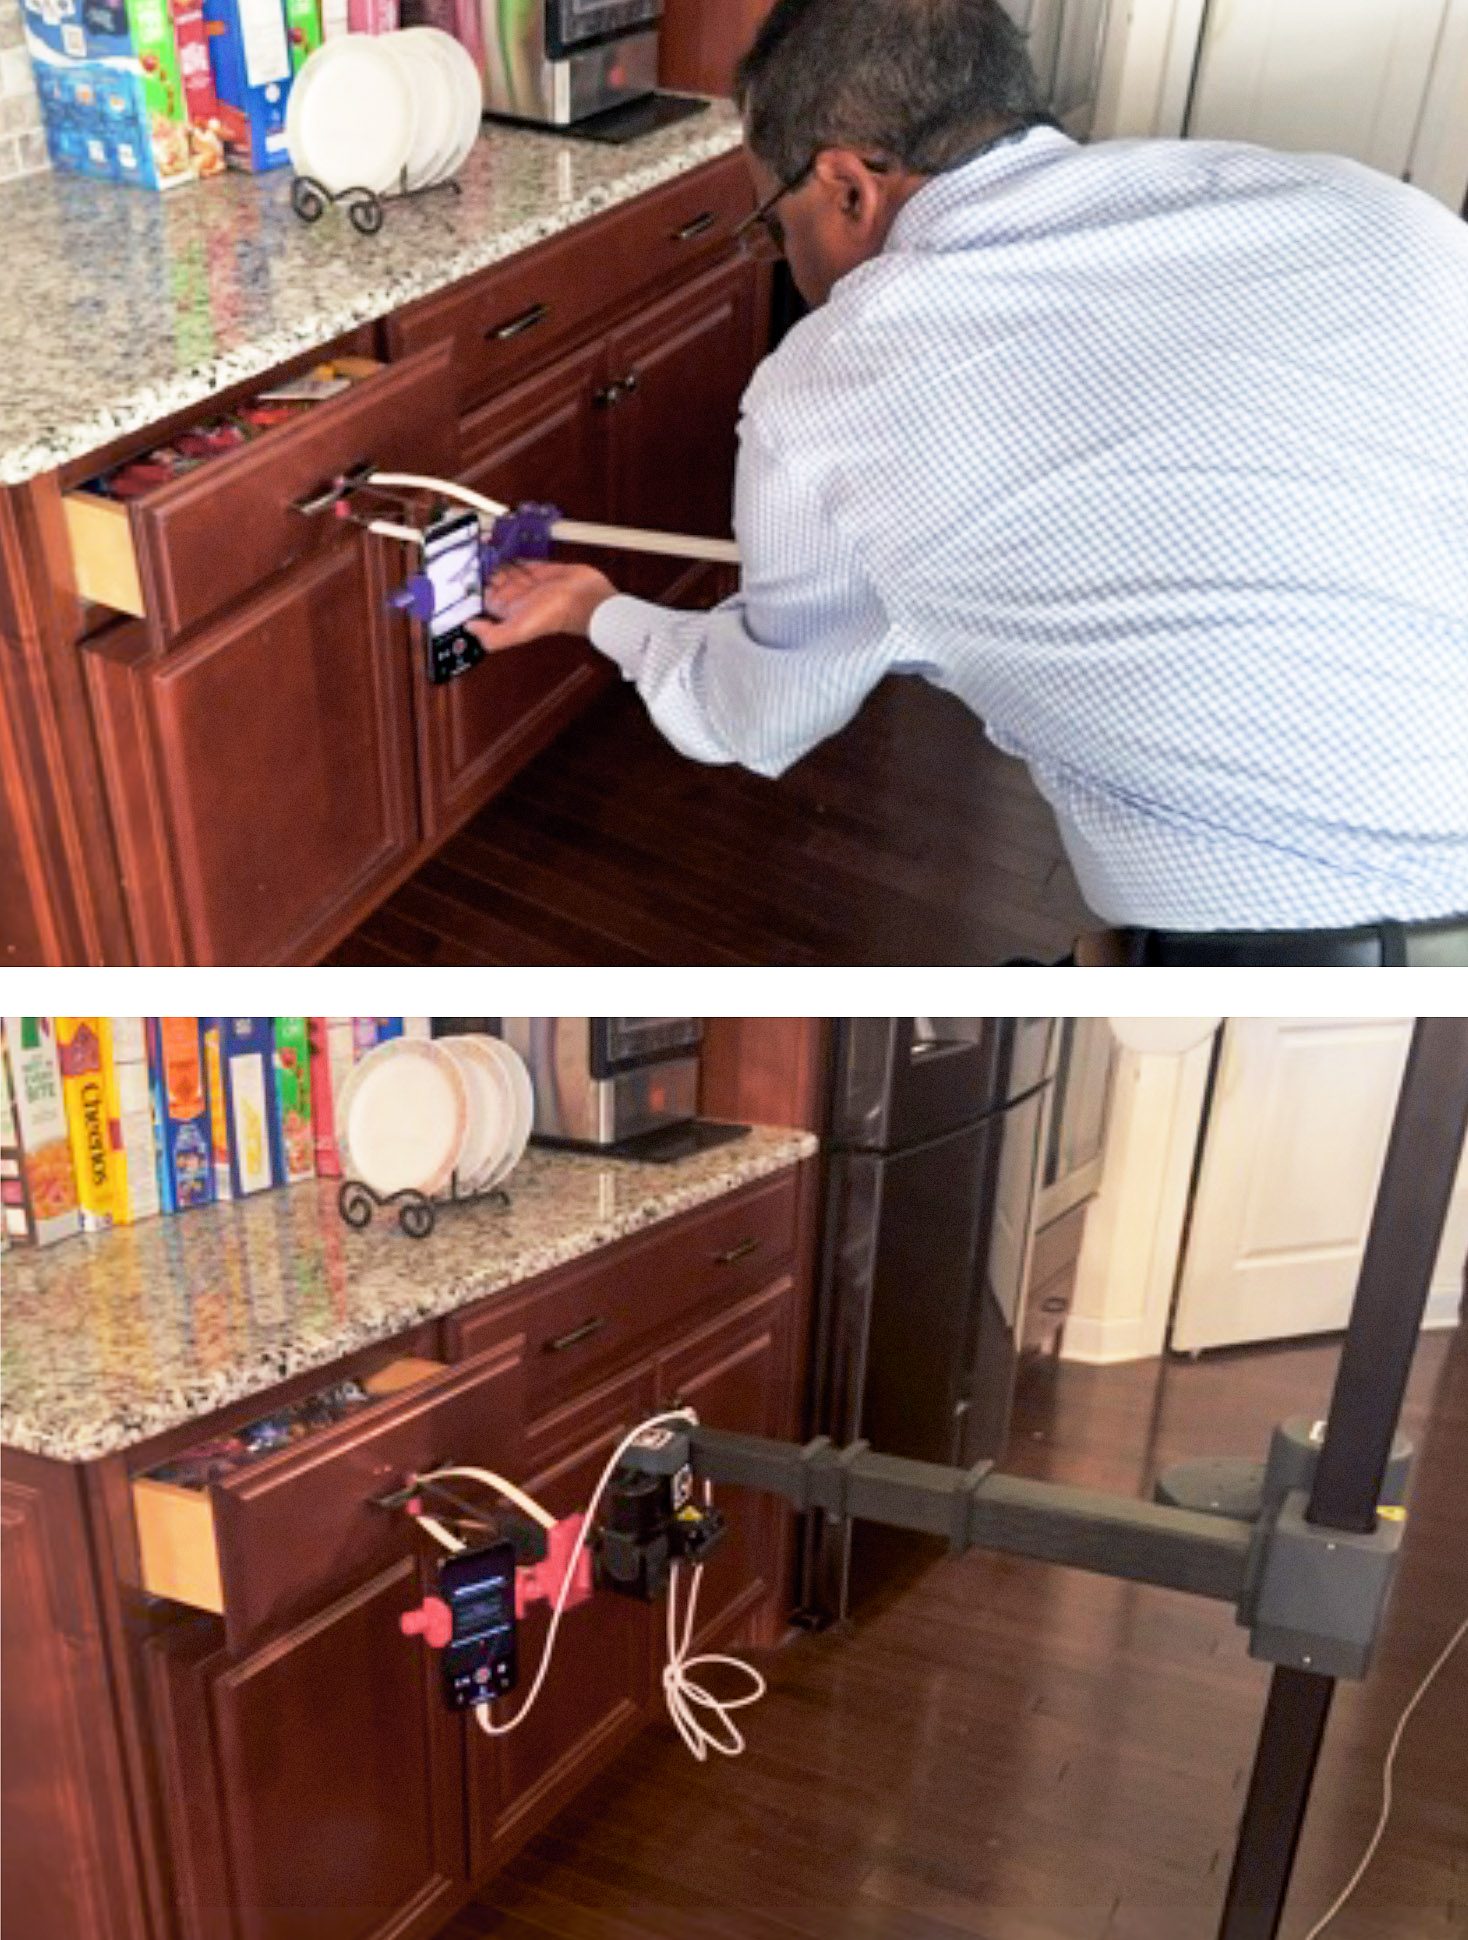 top frame shows a person recording themself opening a kitchen drawer with a grabber, and the bottom shows a robot attempting the same action